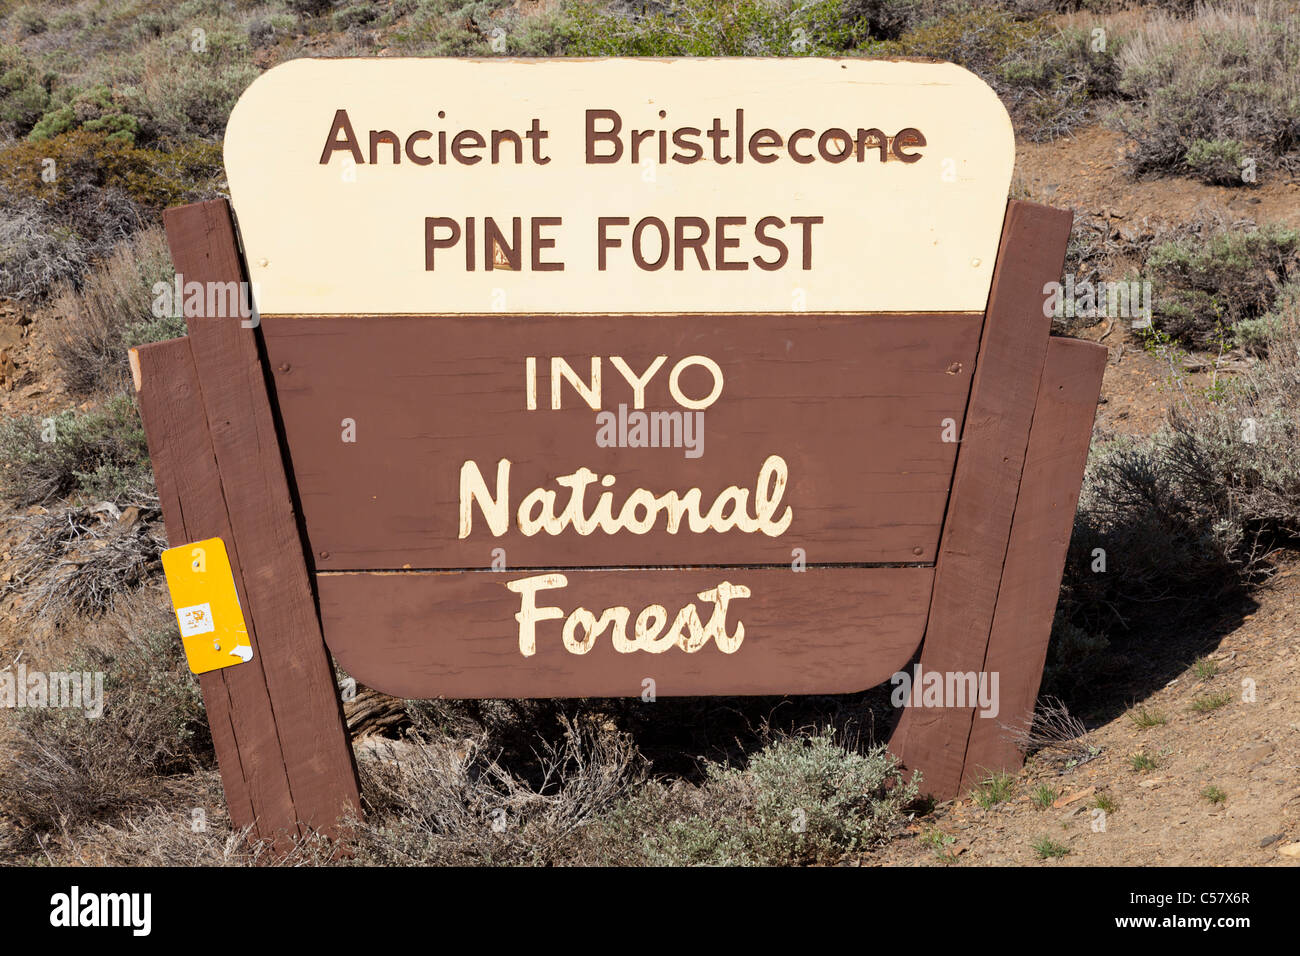 Ancient Bristlecone Pine Forest Inyo National Forest panneau en bois California USA United States of America Banque D'Images